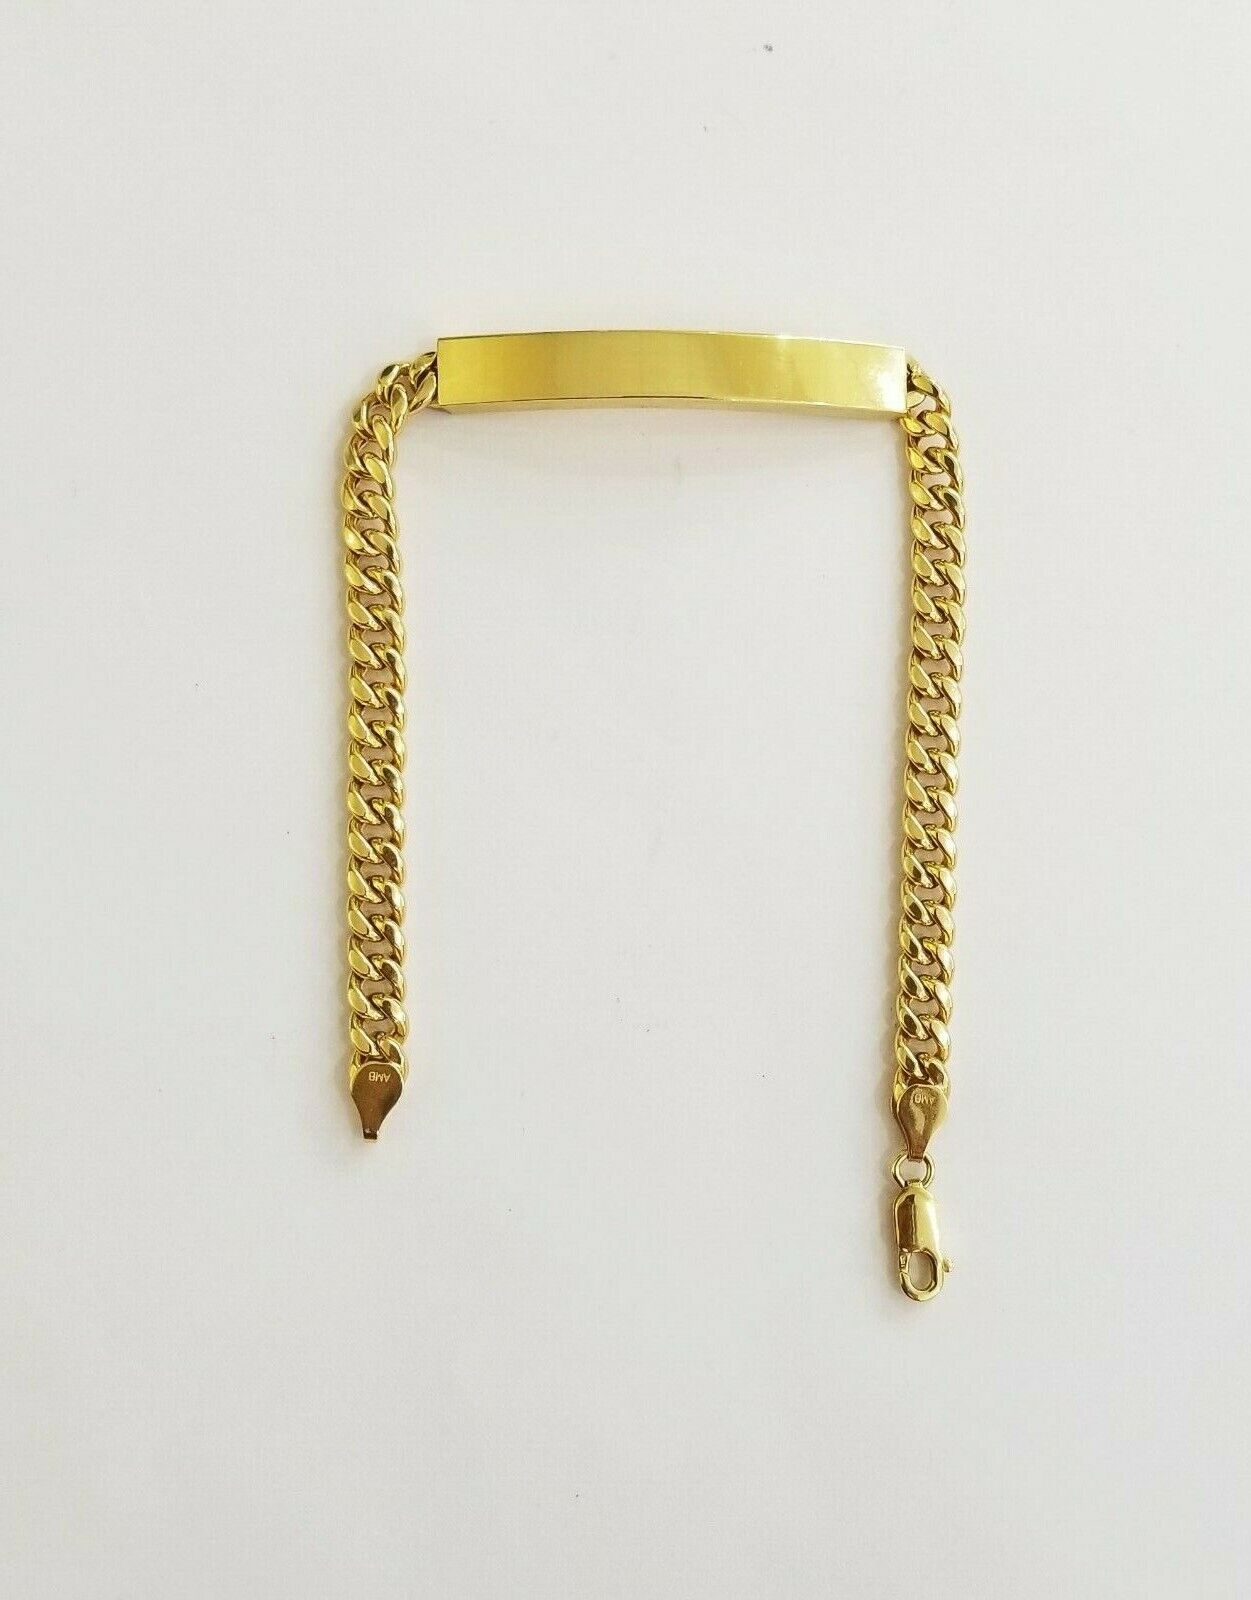 10K Yellow Gold ID Bracelet With Miami Cuban Chain 6mm 8" Long Hand chain 10kt